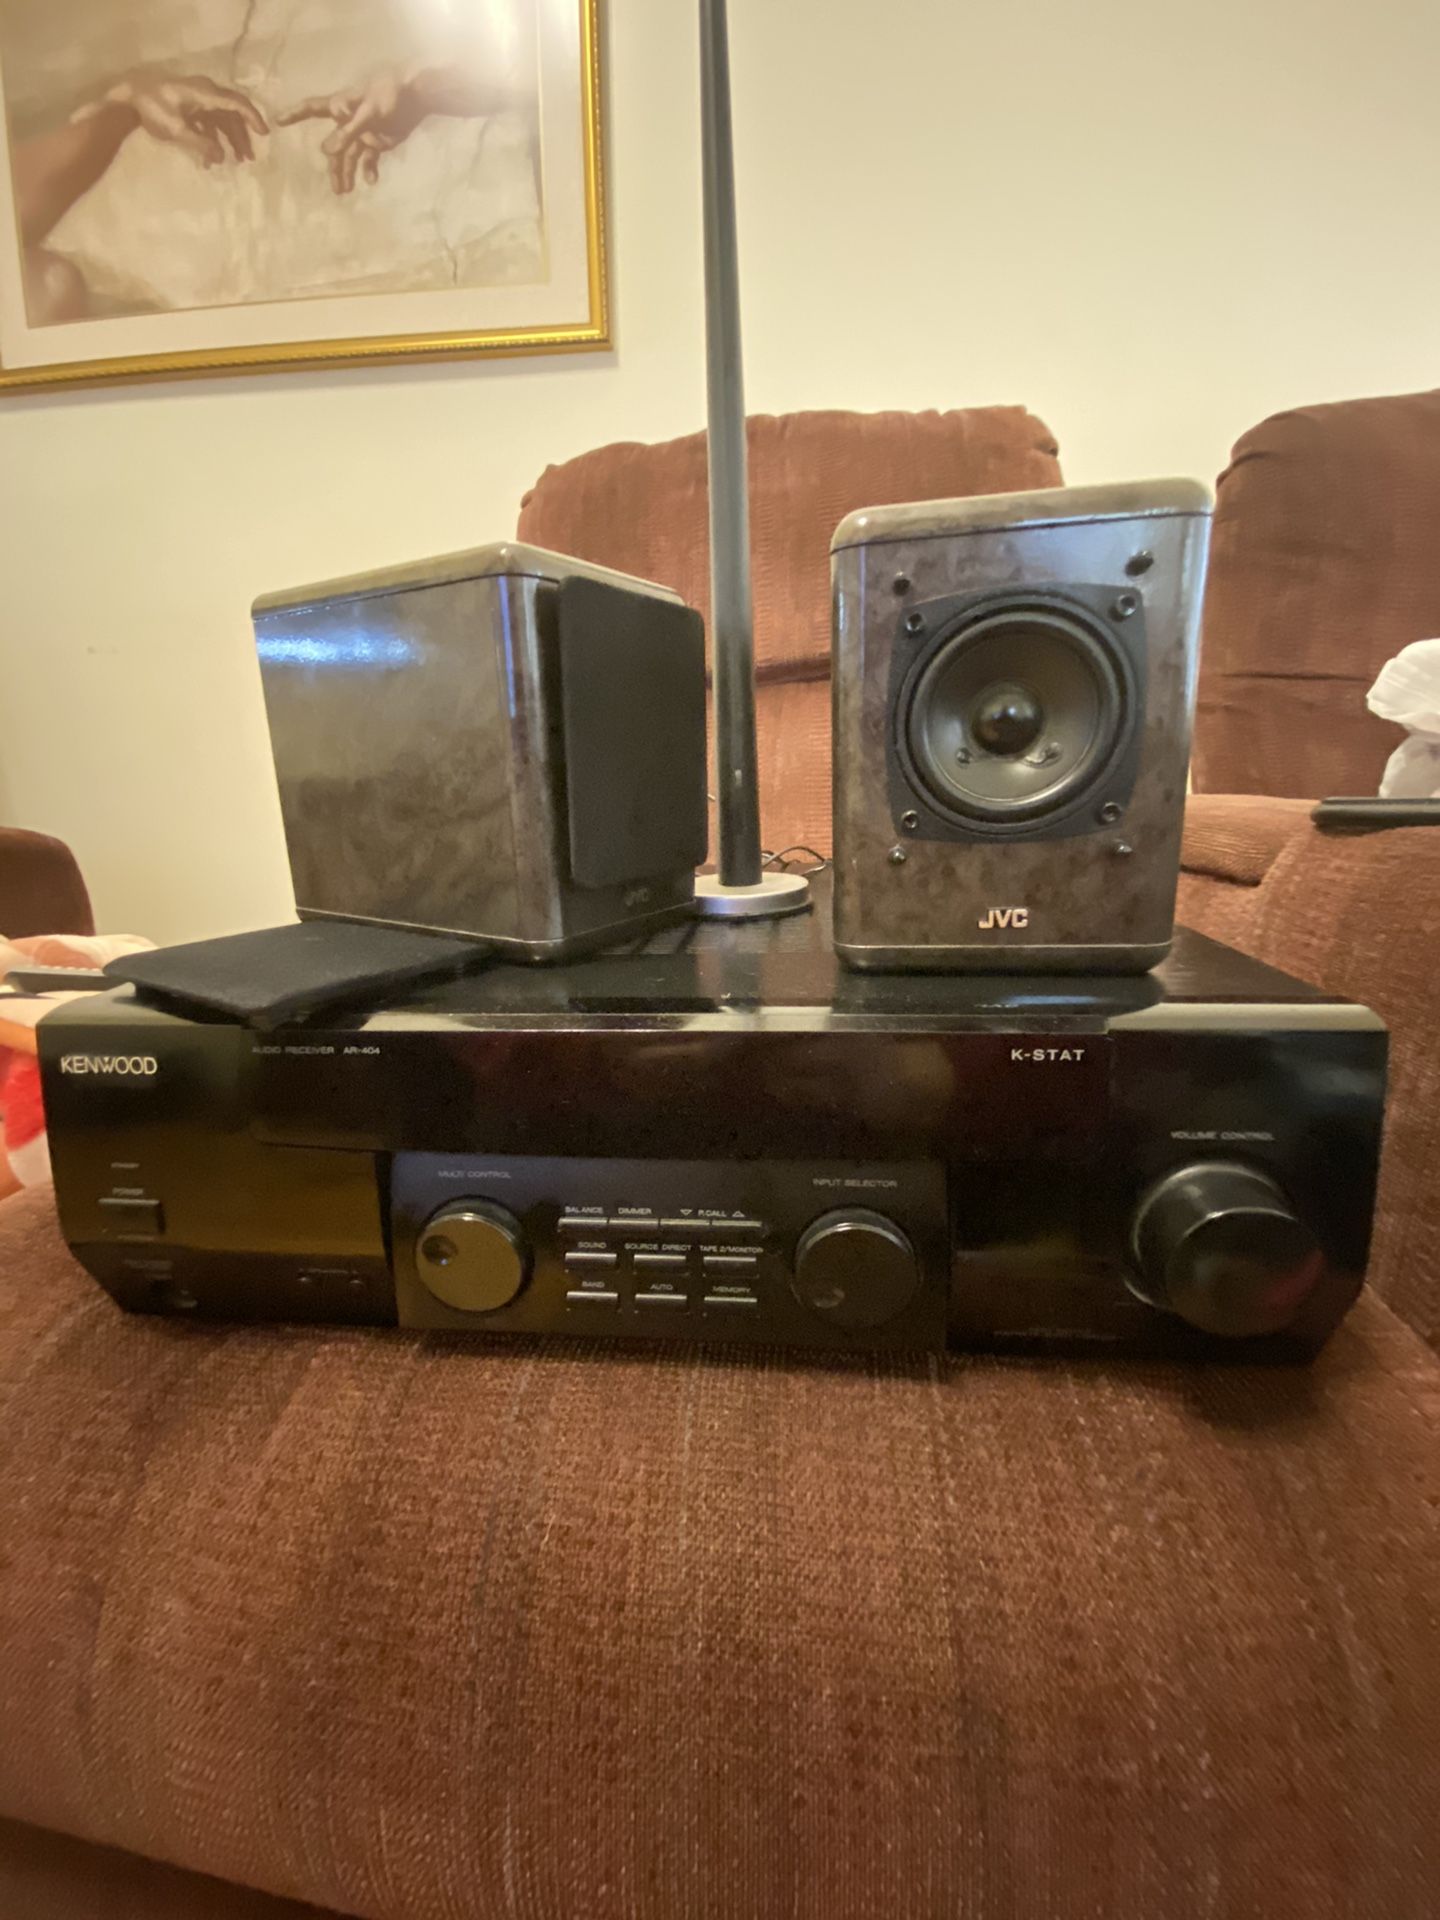 Kenwood k-stat AR-404 2.1 stereo receiver with speakers and radio antenna.